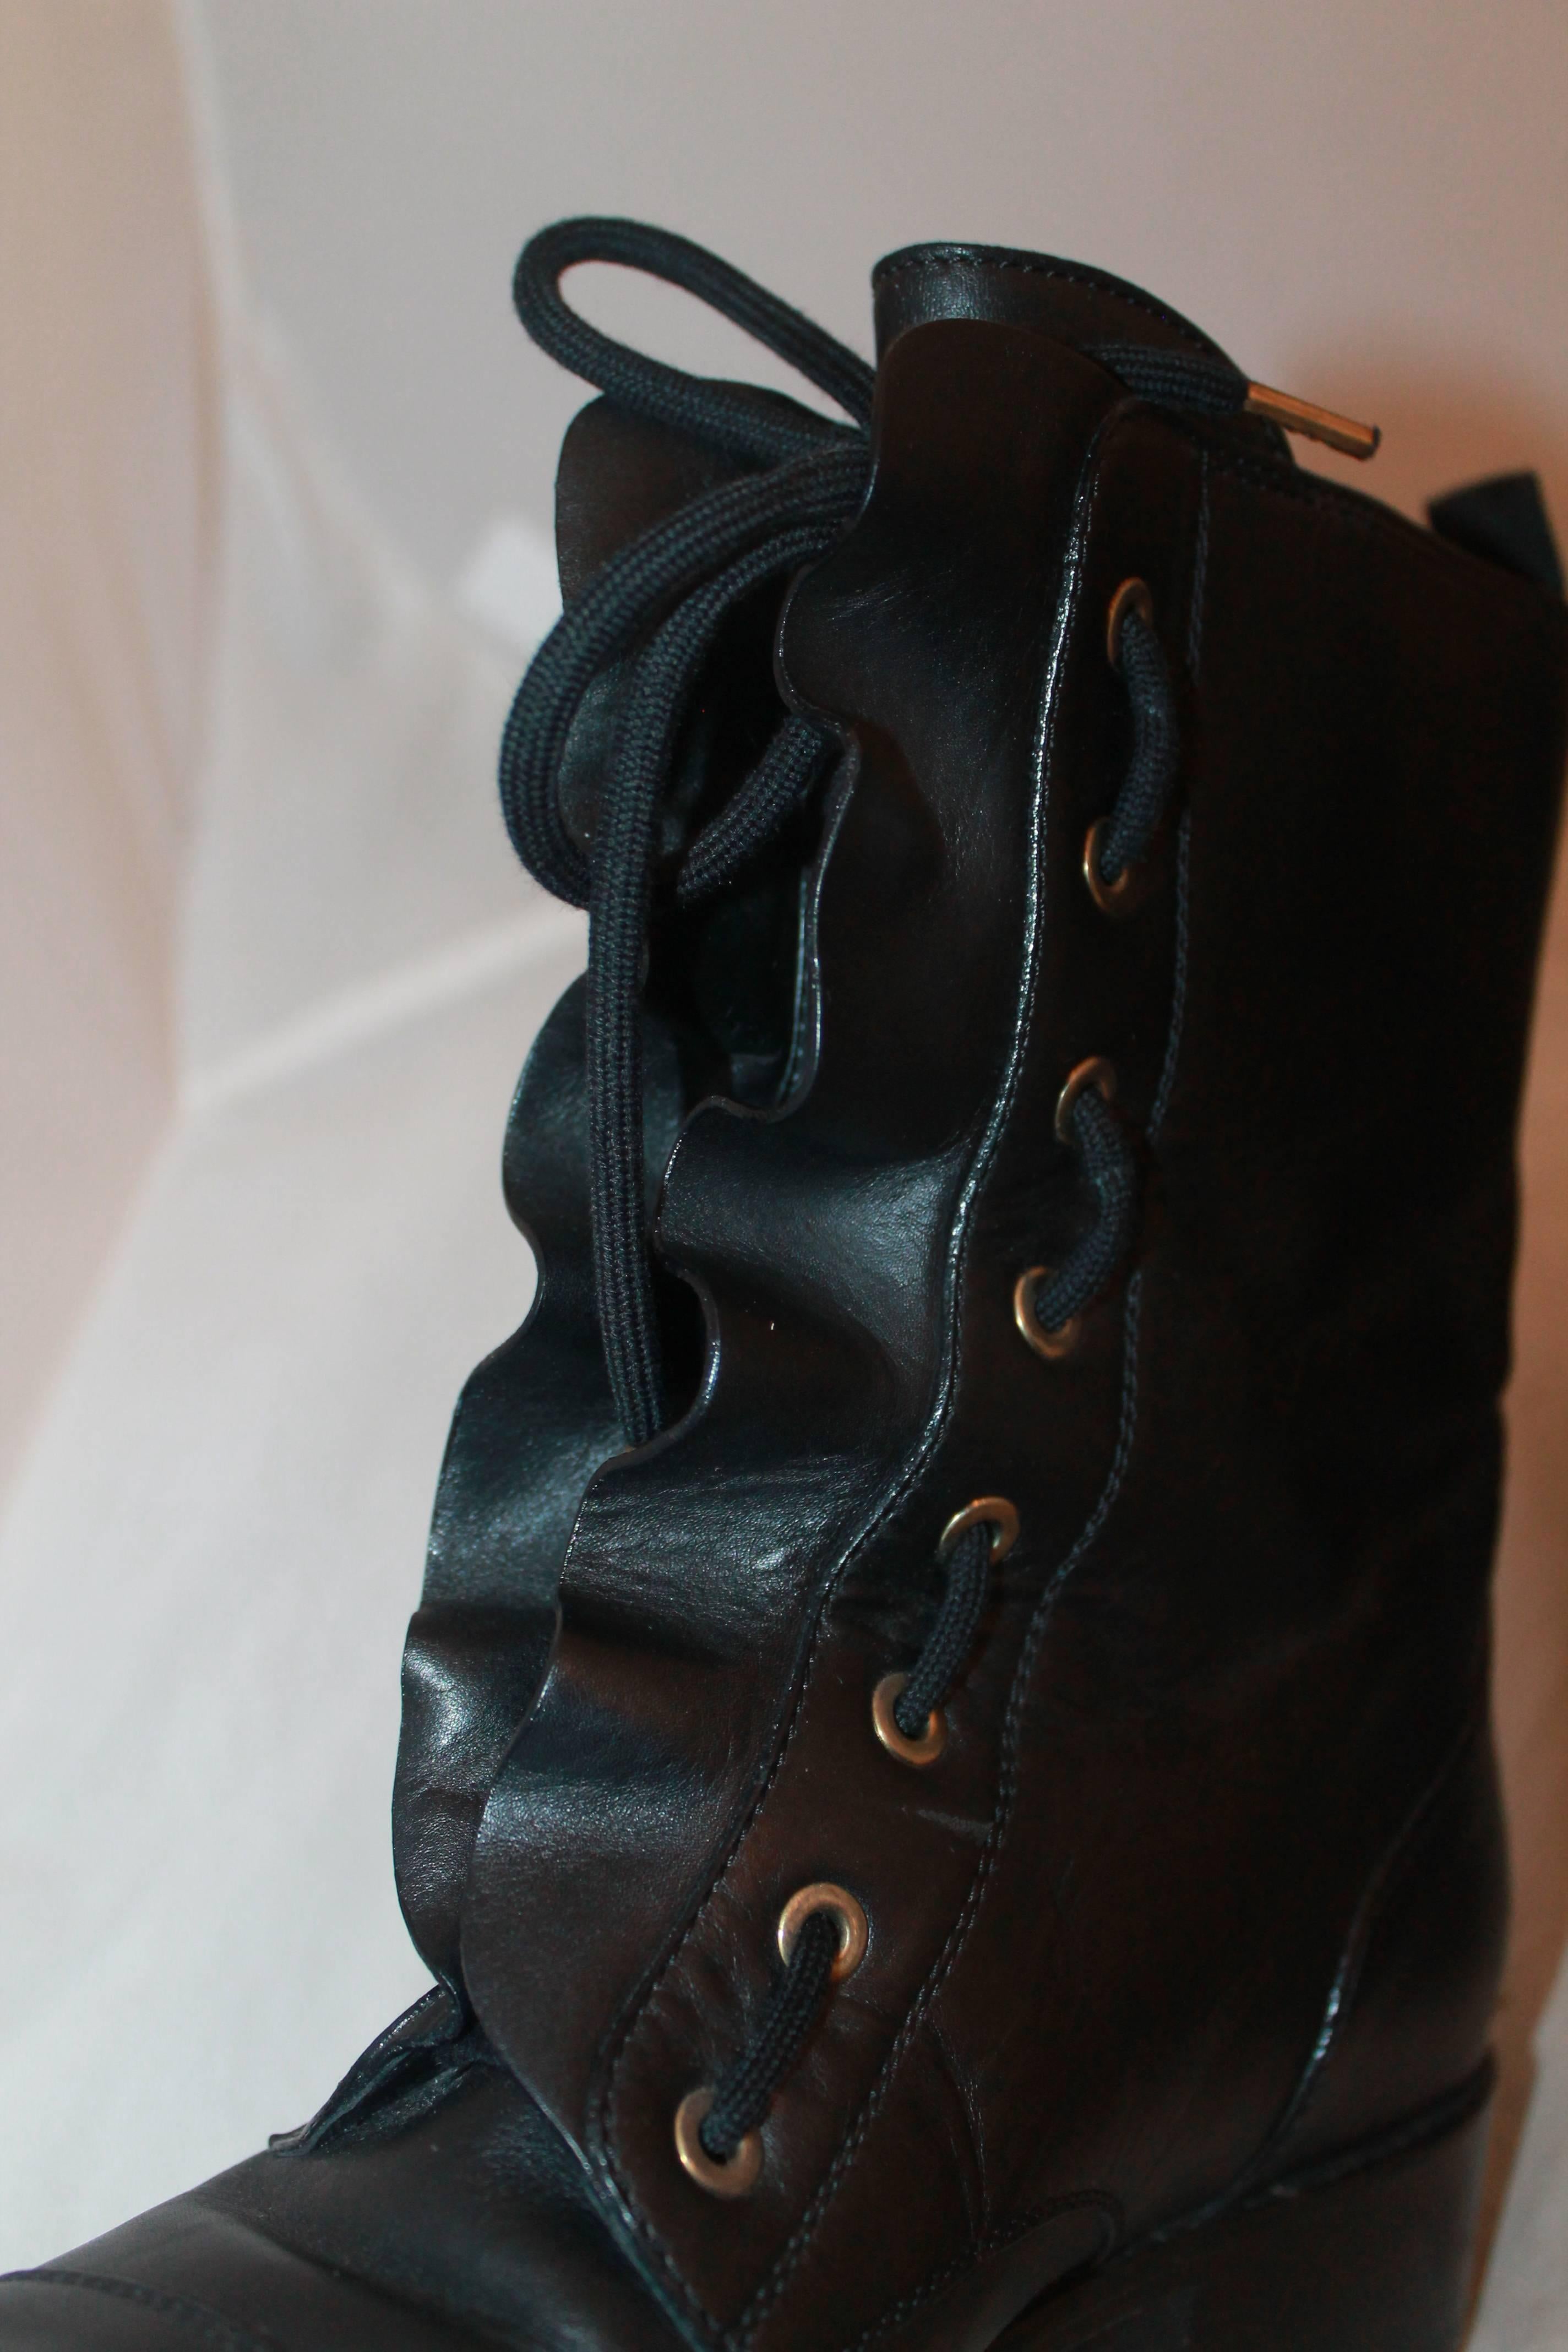 Valentino Black Leather Ruffle Combat Boots - 38 - Retail: $1200.  These incredible boots are in excellent condition; they have never been worn, but they have some minor wear visible on the left toe and the right heel.  They feature a lovely black